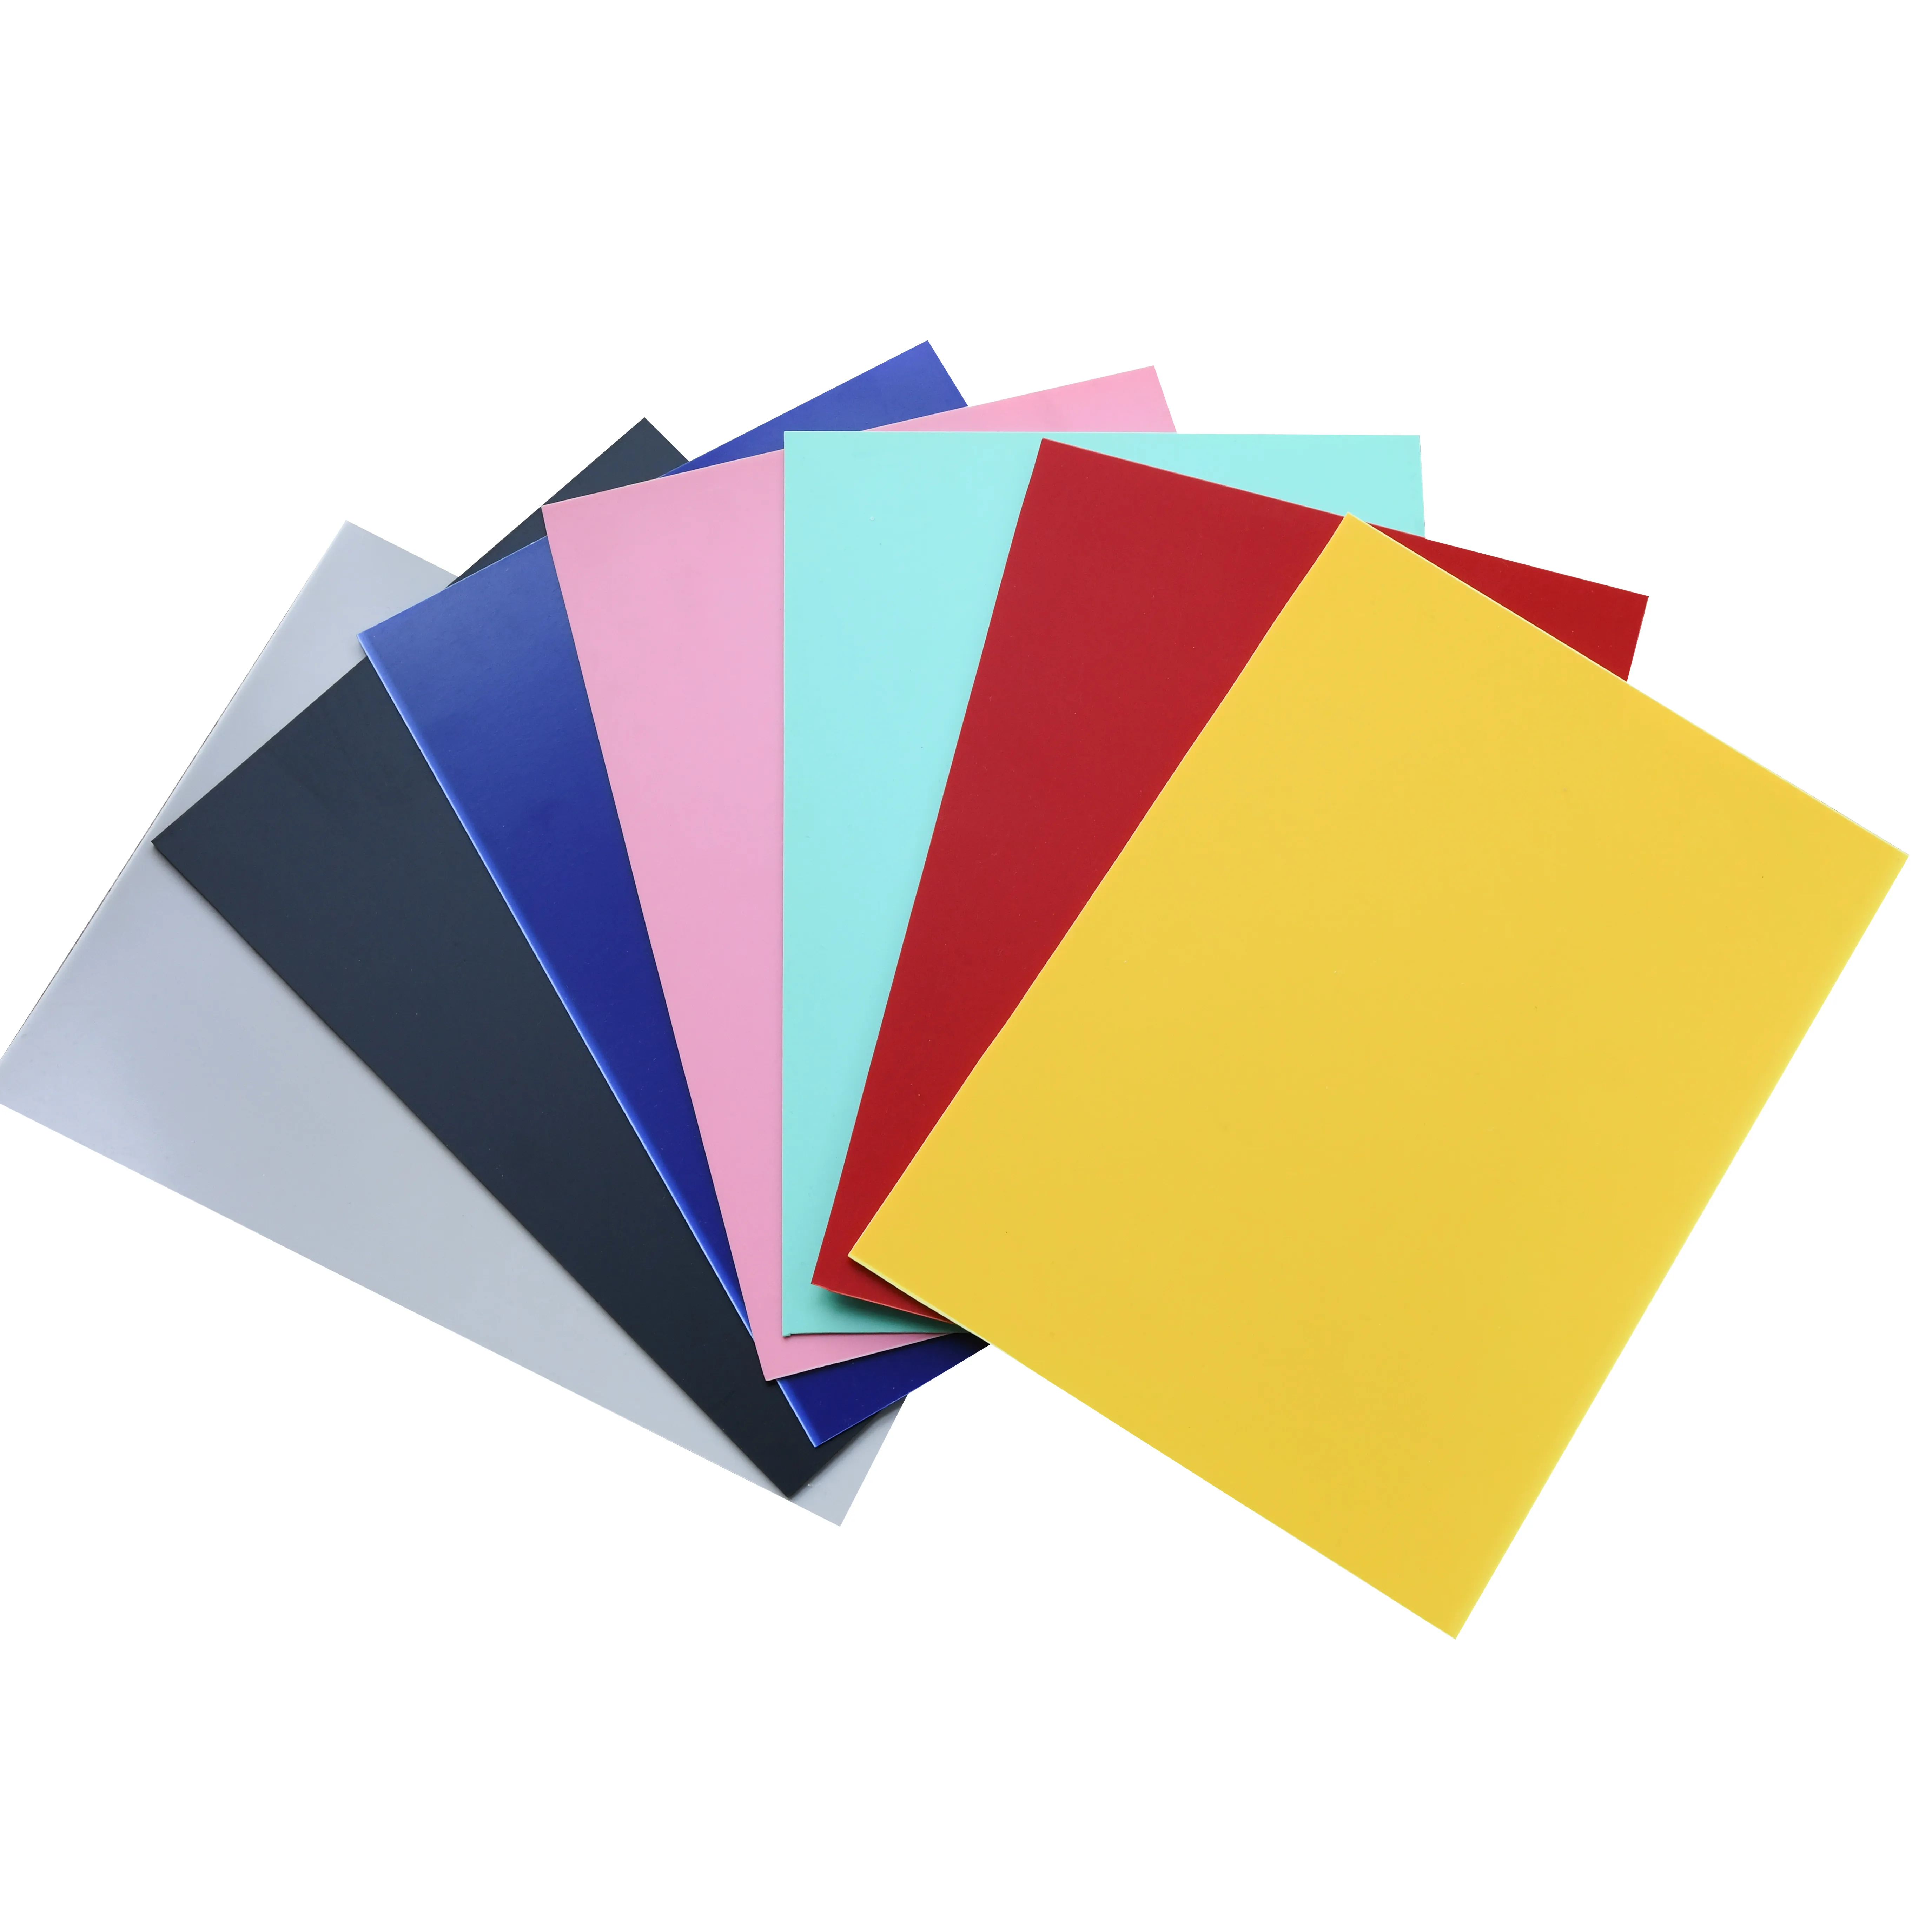 UV Resistant Weatherable Colourful Thermoform Plastic ASA Composite ABS Sheet for Radome Forming